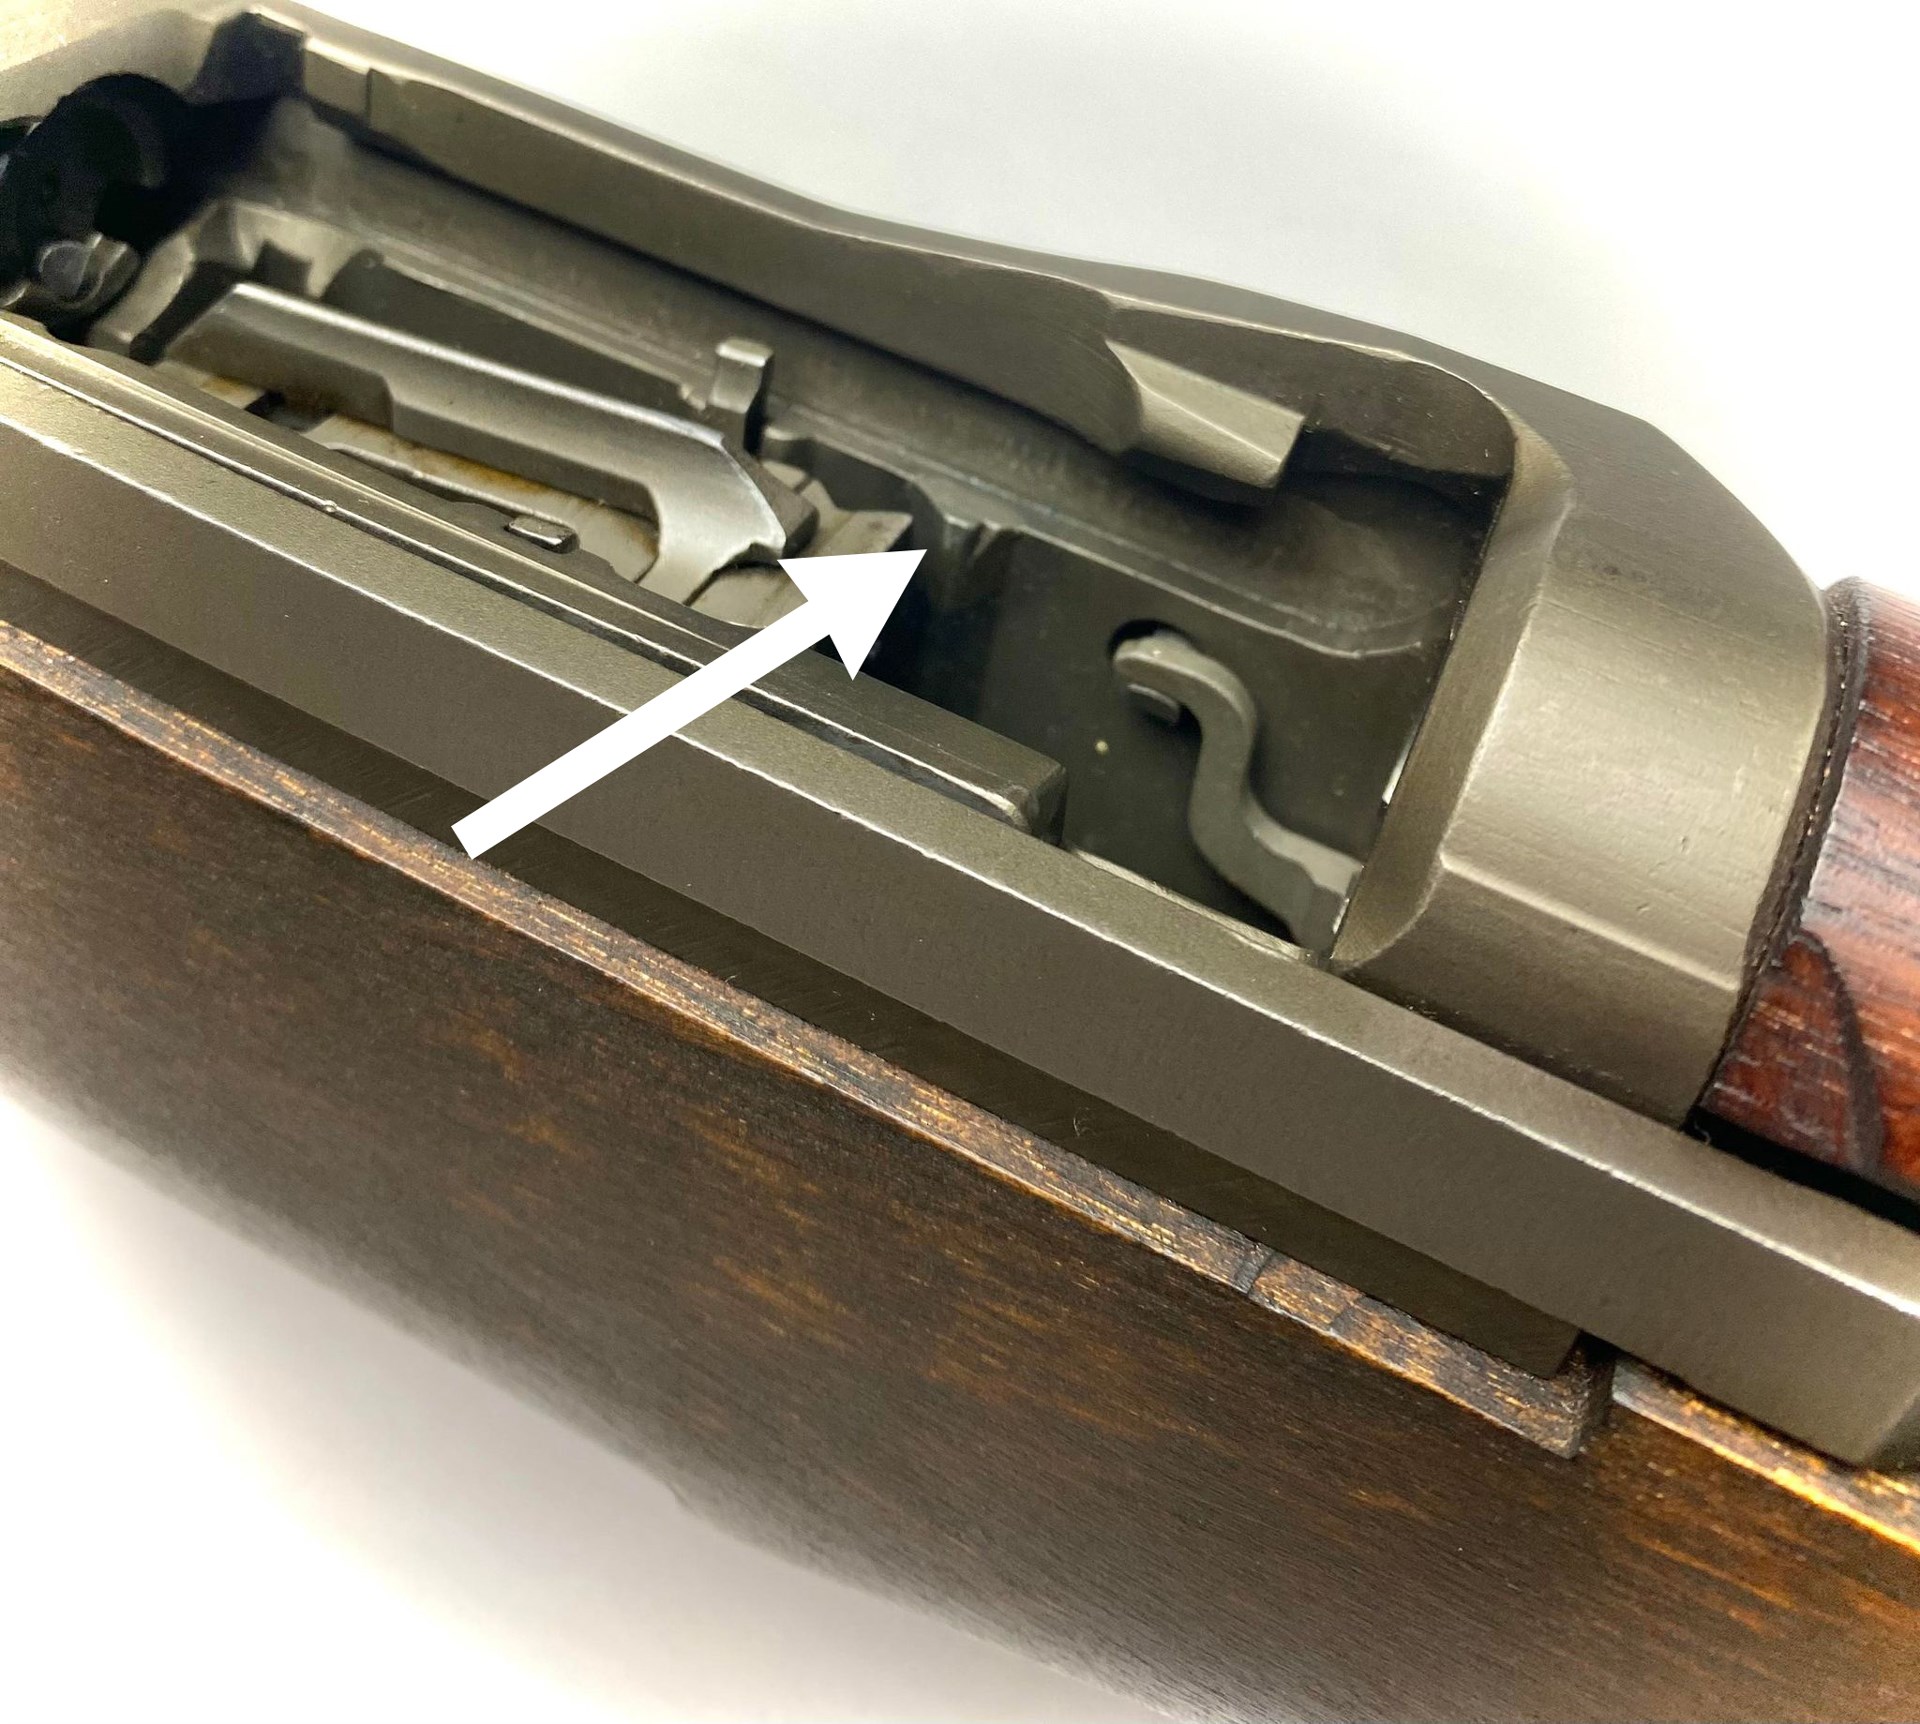 The modification (arrow) on the inside of the receiver showing the modification to fix the “7th round stoppage.” The discoloration on the “rib” showing where extra metal was welded to fix that problem